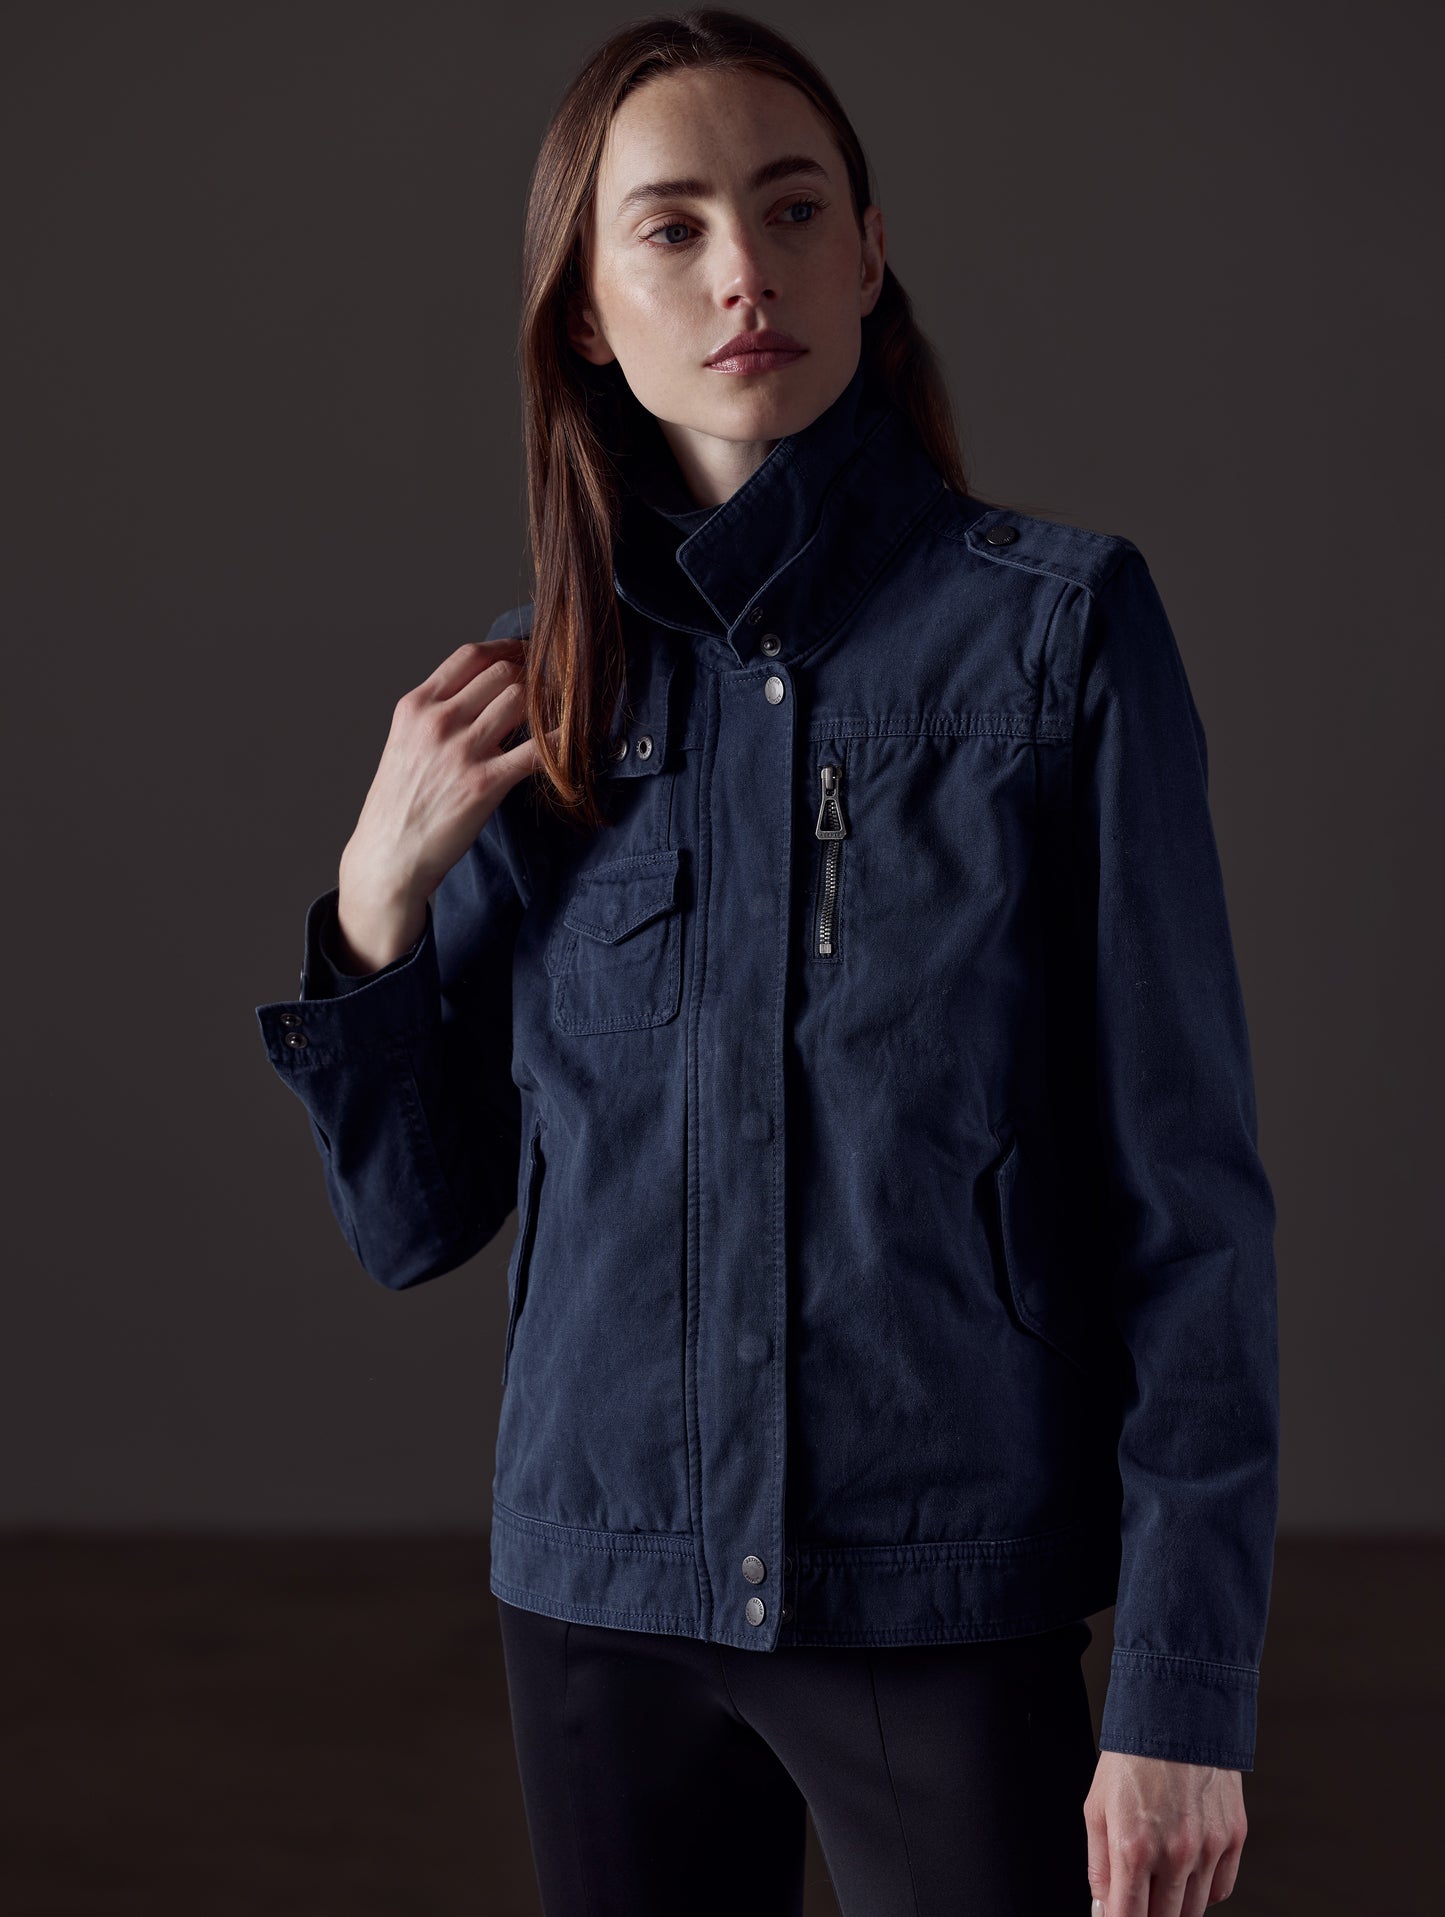 Woman wearing blue jacket from AETHER Apparel